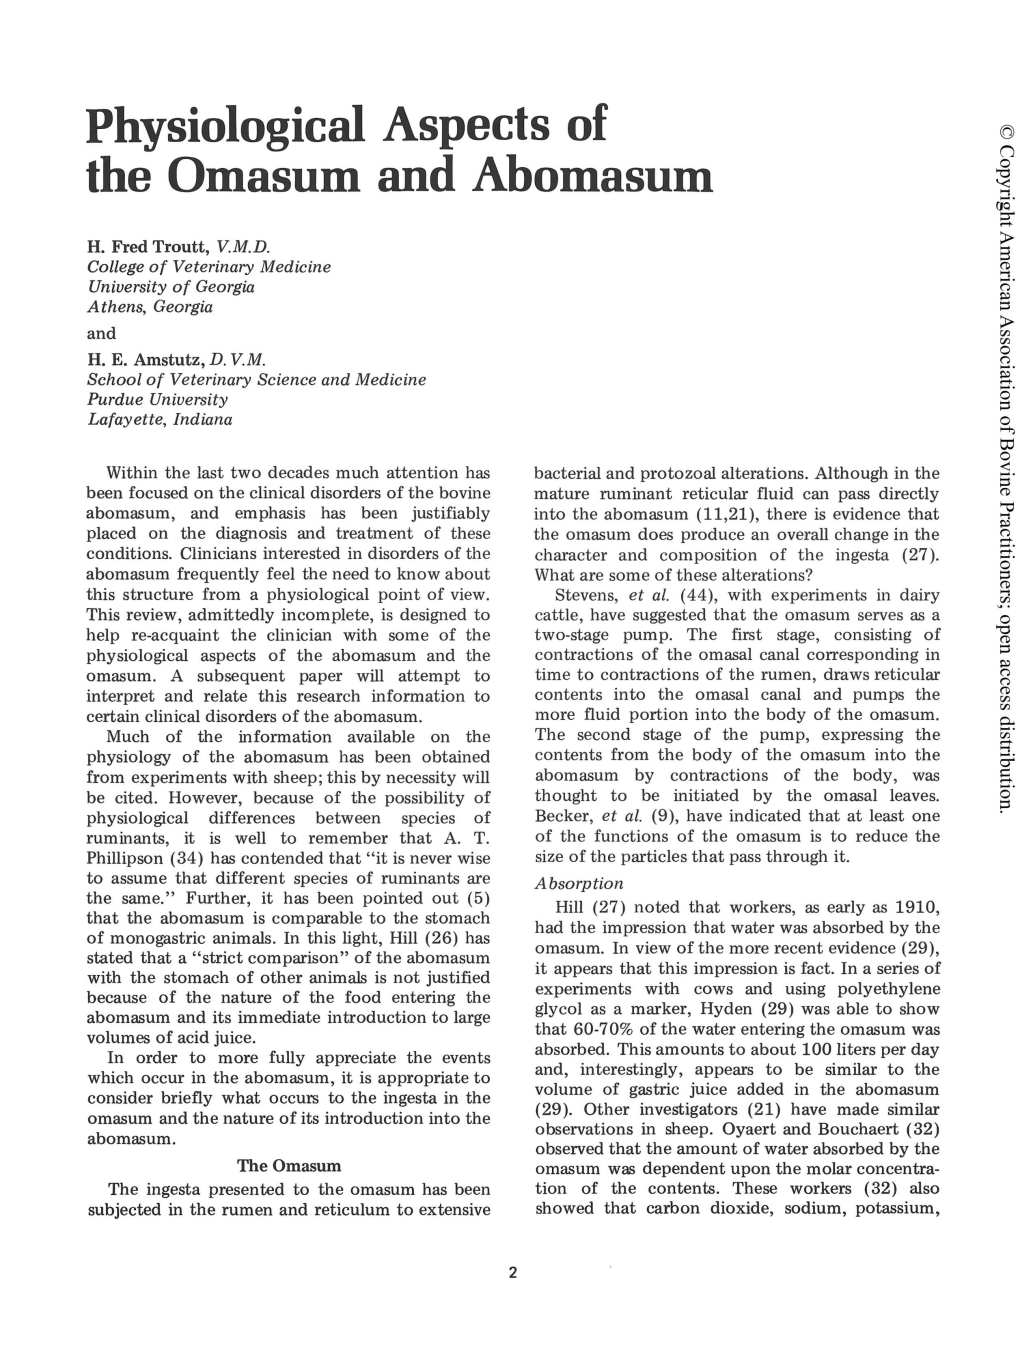 Physiological Aspects of the Omasum and Abomasum